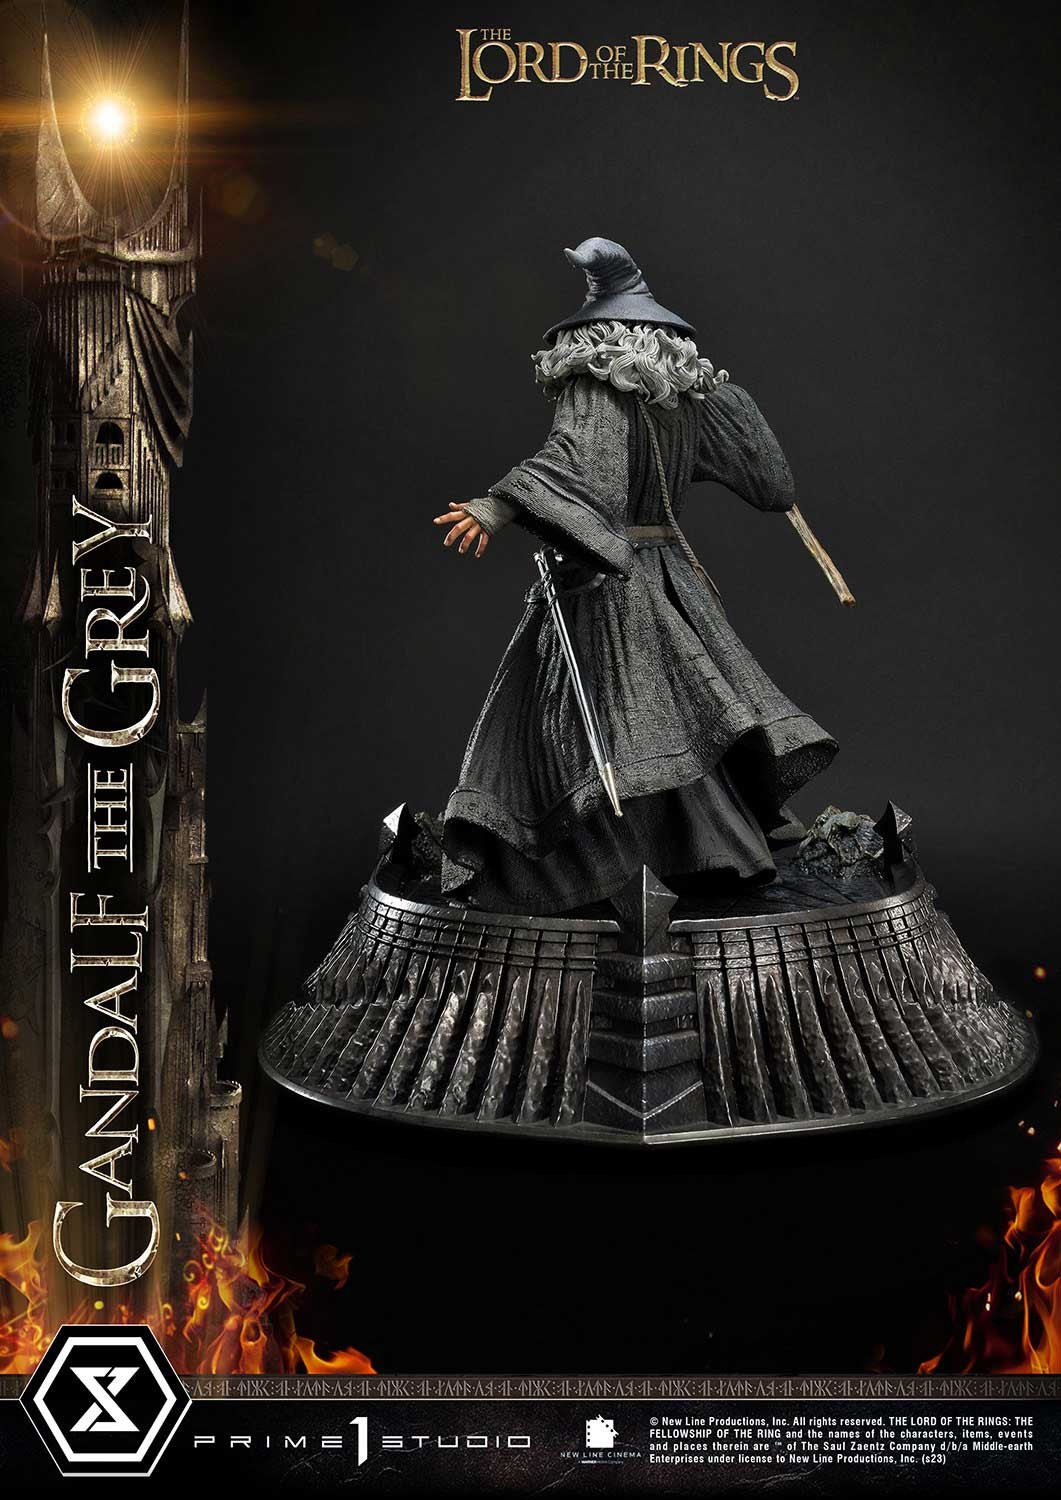 GANDALF THE GREY 1/4 Scale Statue Gandalf-the-grey_the-lord-of-the-rings_gallery_64c4068238fd8